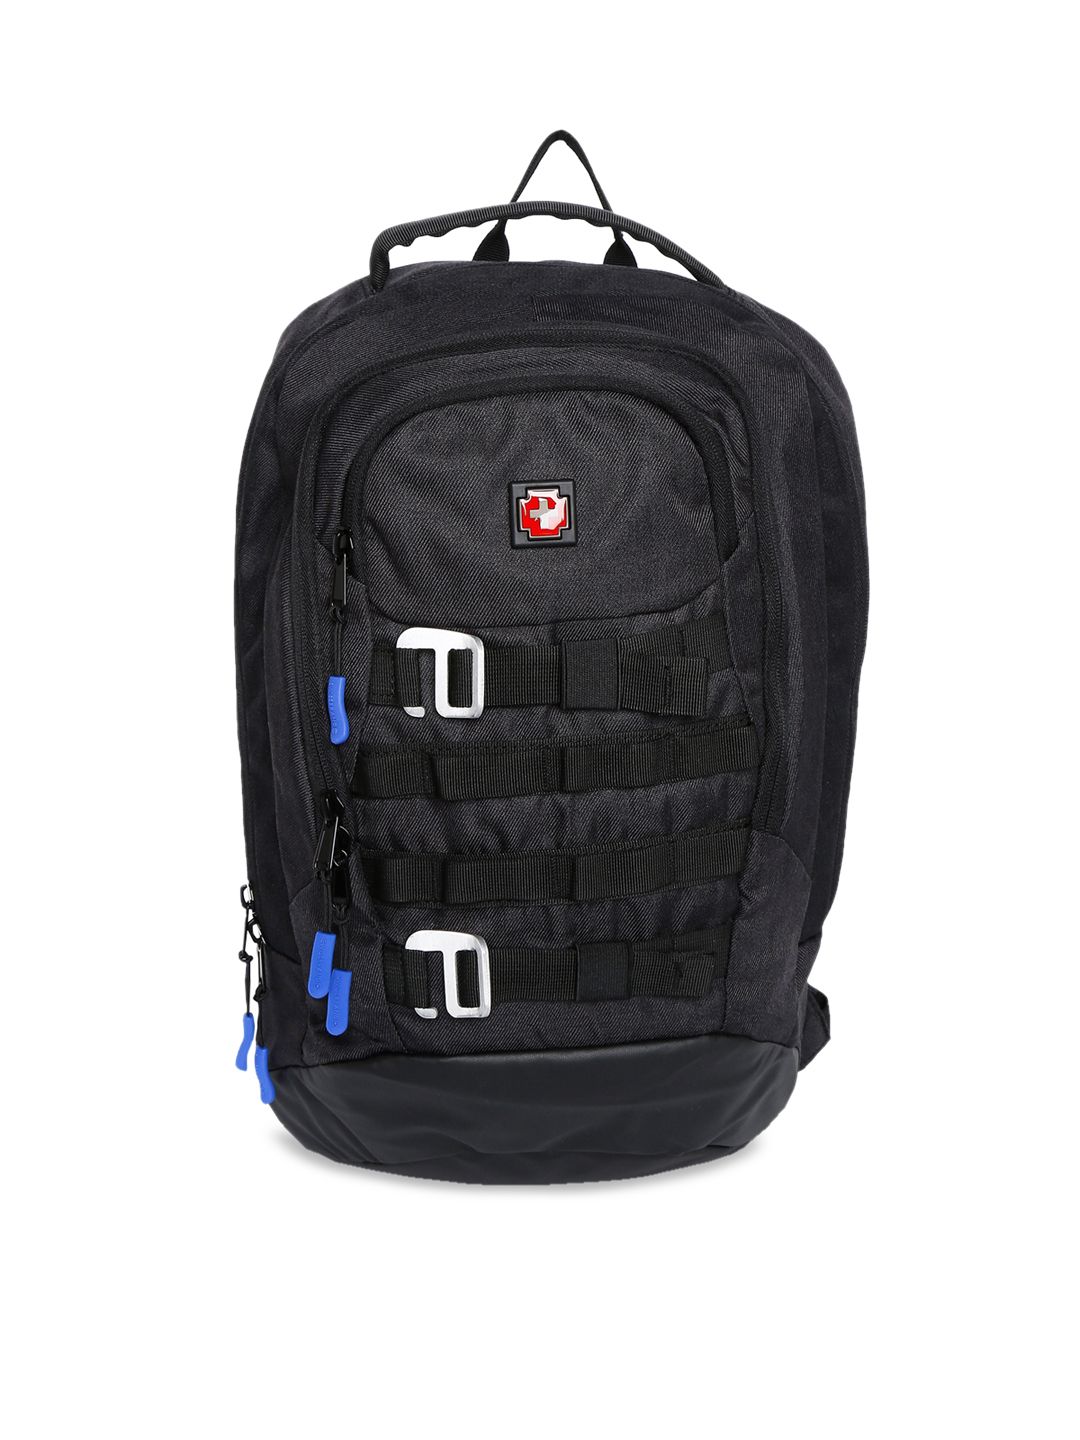 SWISS BRAND Unisex Black Solid Backpack Price in India